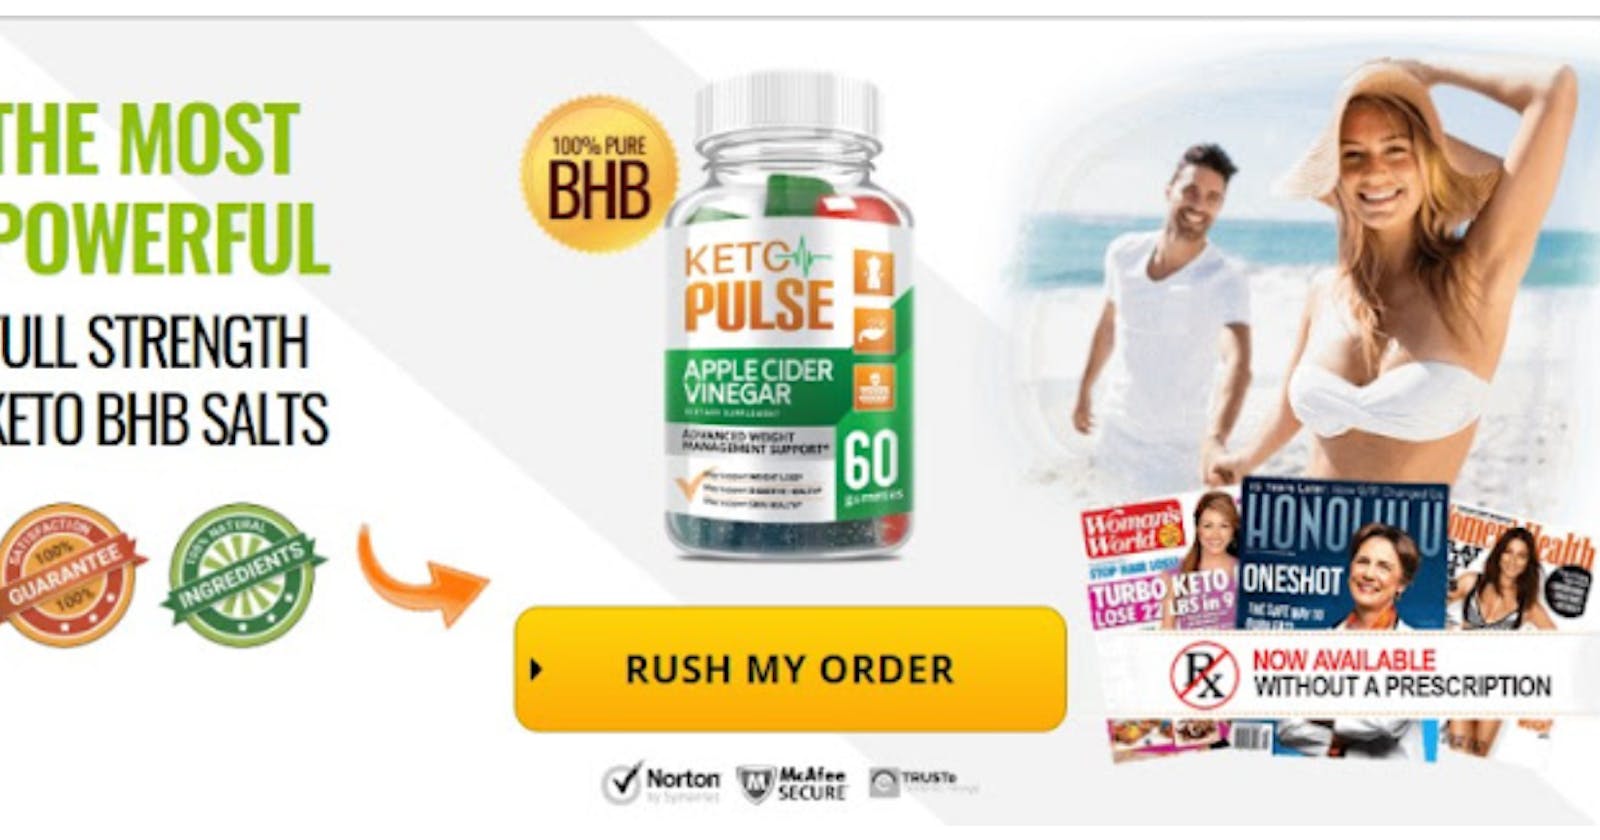 Keto Pulse ACV Gummies Reviews, Weight loss, cost, Price, amazon, side effects, shark tank, Ingredients, walmart, Do They Work & Where To Buy?